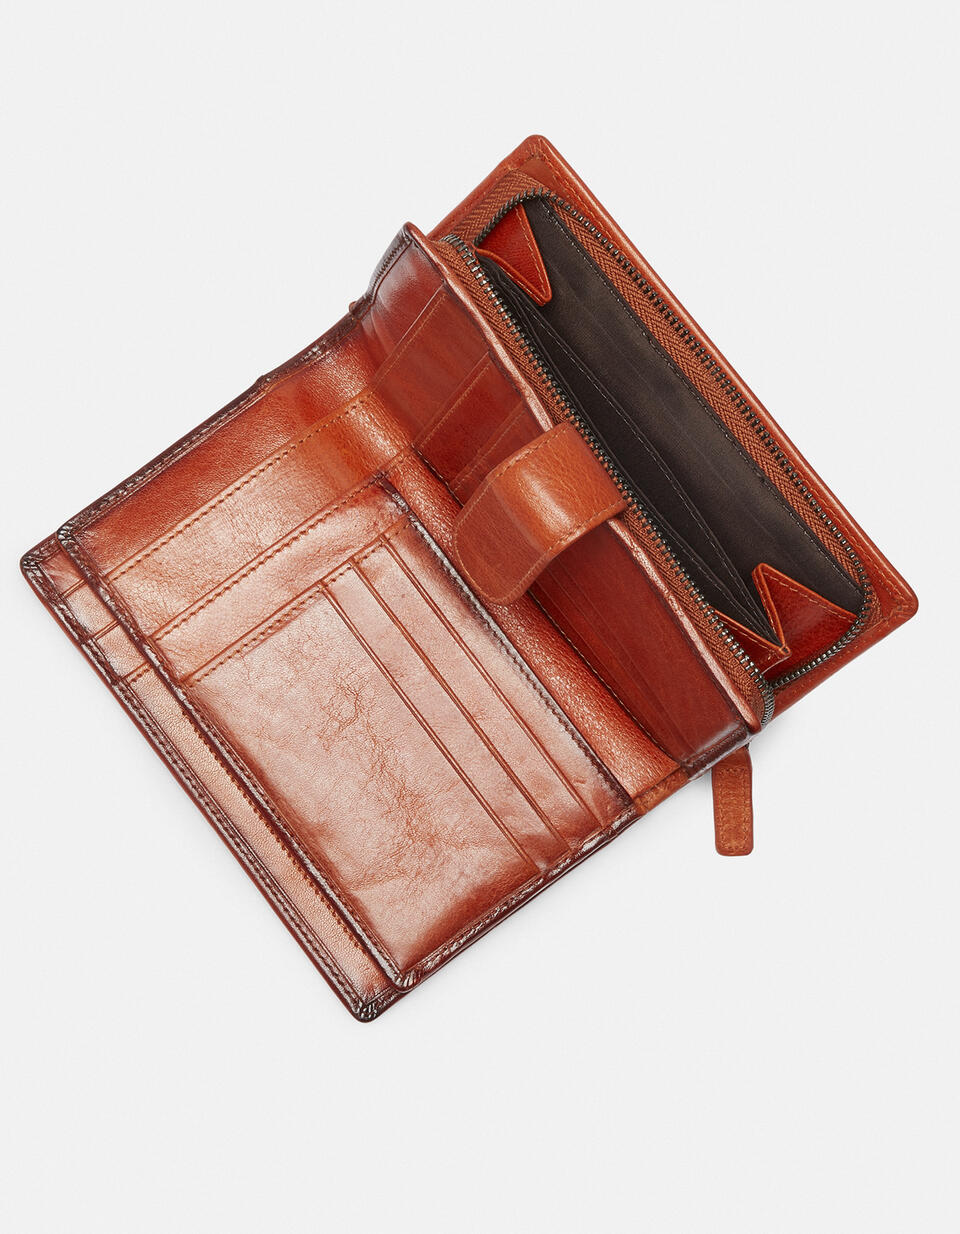 Wallet with coin purse - Women's Wallets - Women's Wallets | Wallets  - Women's Wallets - Women's Wallets | WalletsCuoieria Fiorentina